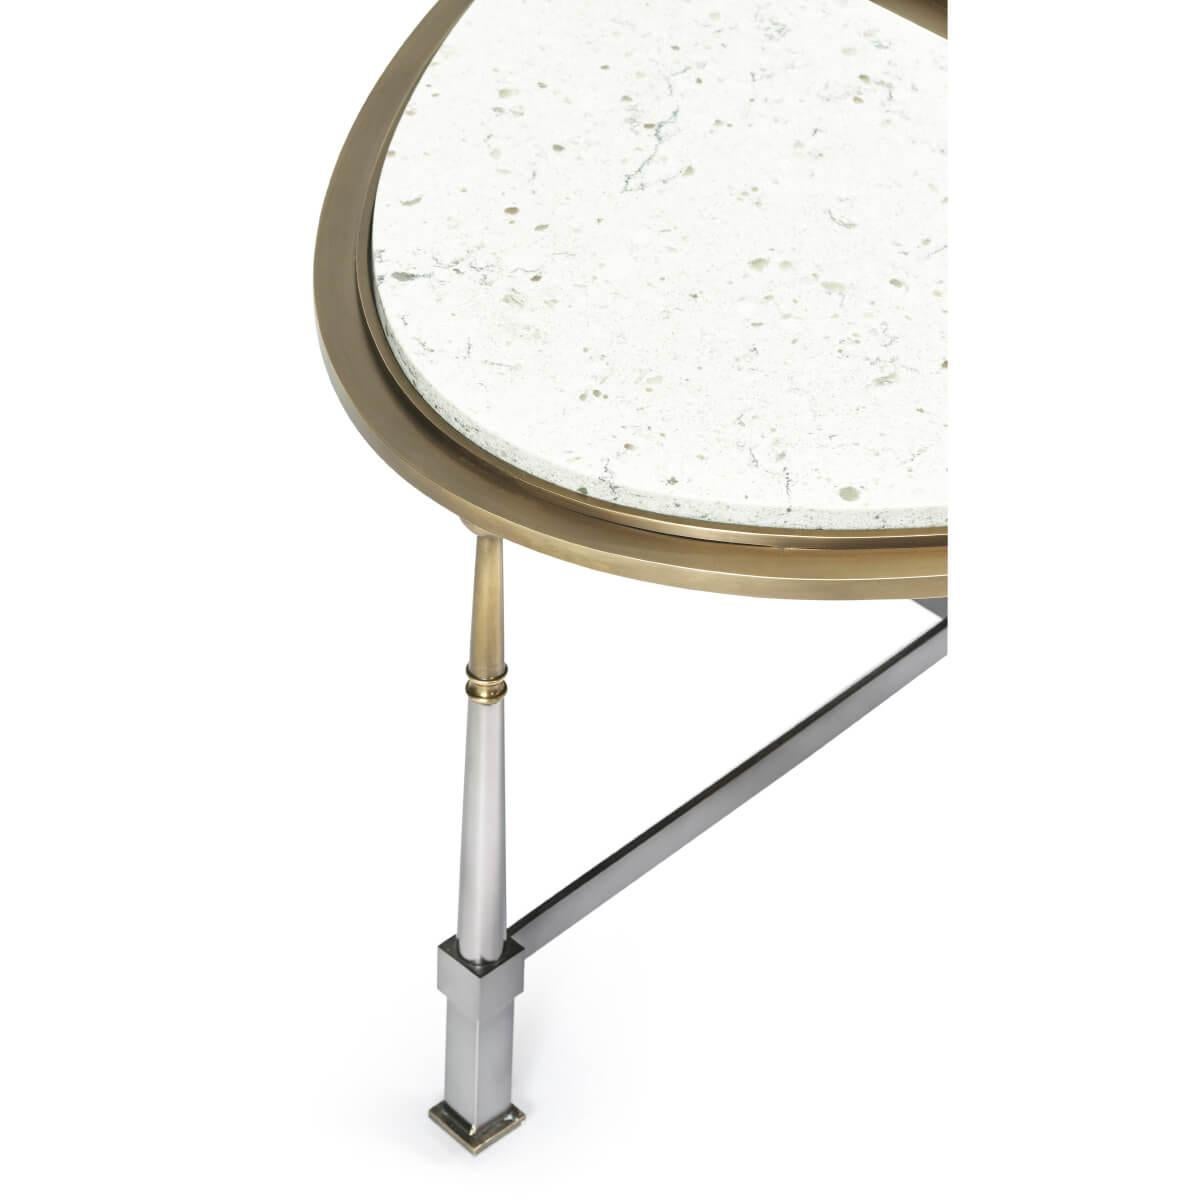 Brass Art Deco Style Marble-Top Cocktail Table